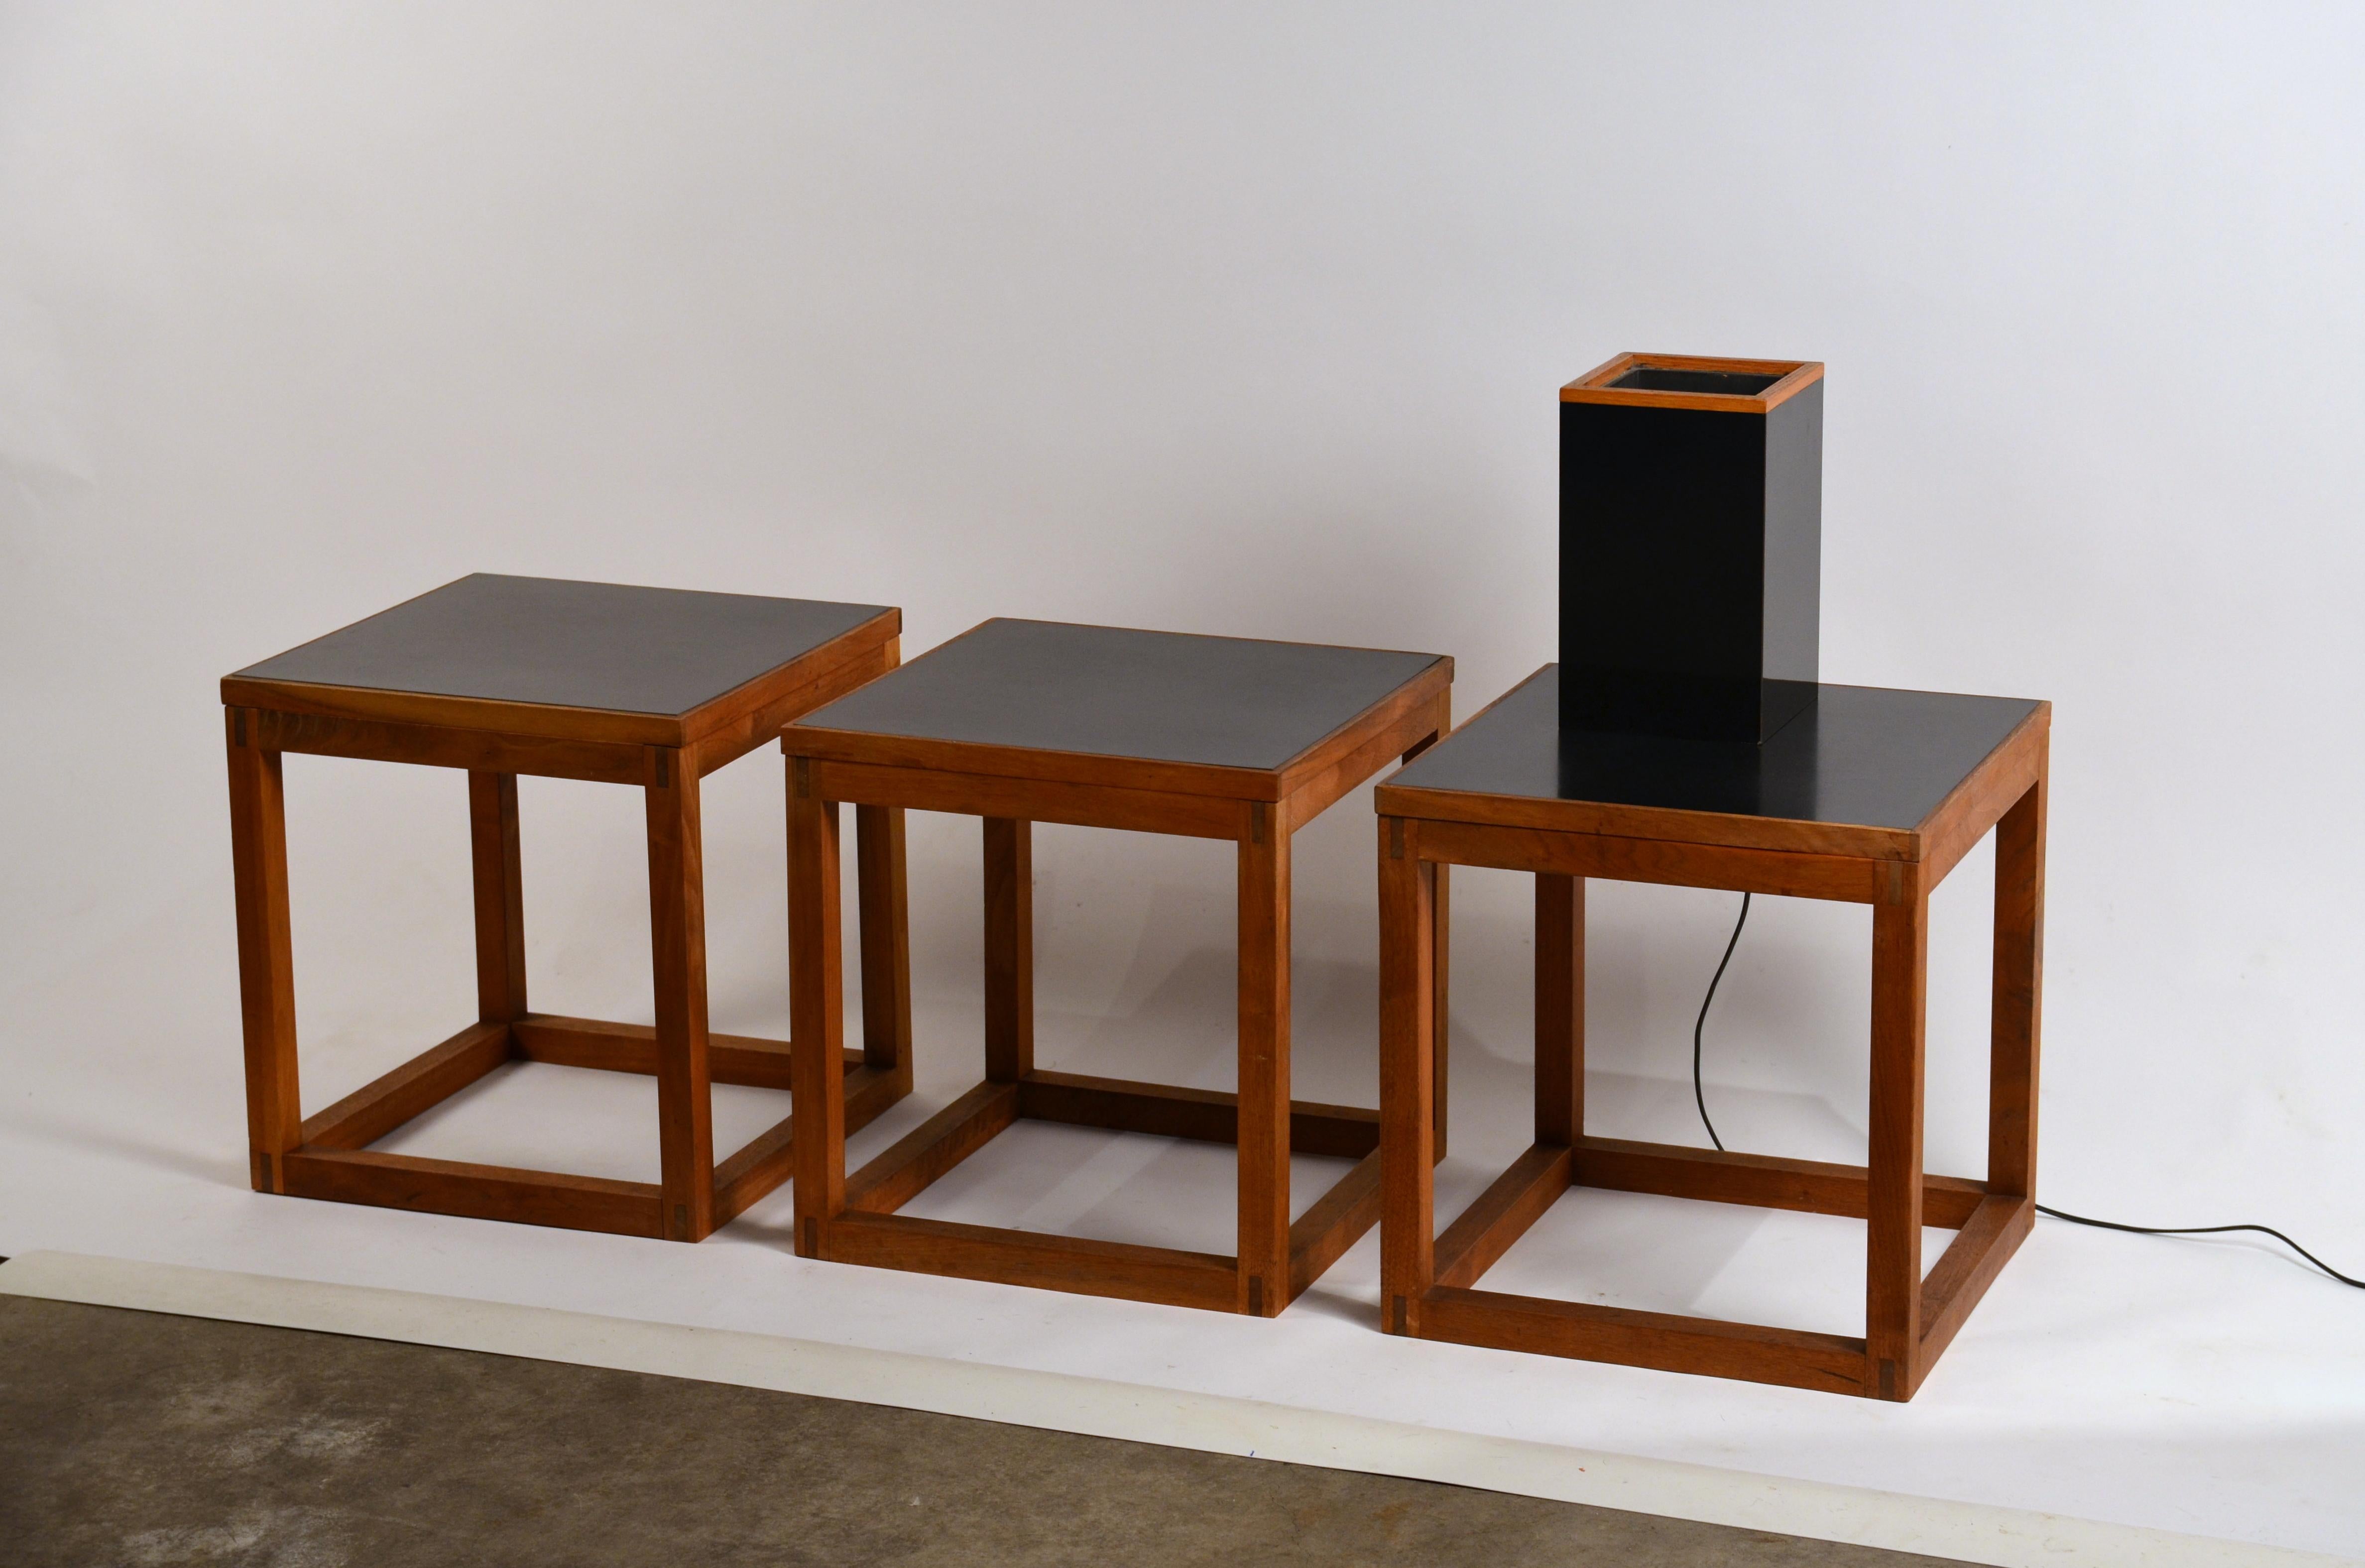 Set of 3 minimal teak and black laminate side tables. Matching bonus lamp included.

Dimensions listed are for each table.

The lamp is 6 in. wide x 6 in. deep x 10 in. tall.

Versatile minimal design. Can also be used as stools or a 3-part coffee